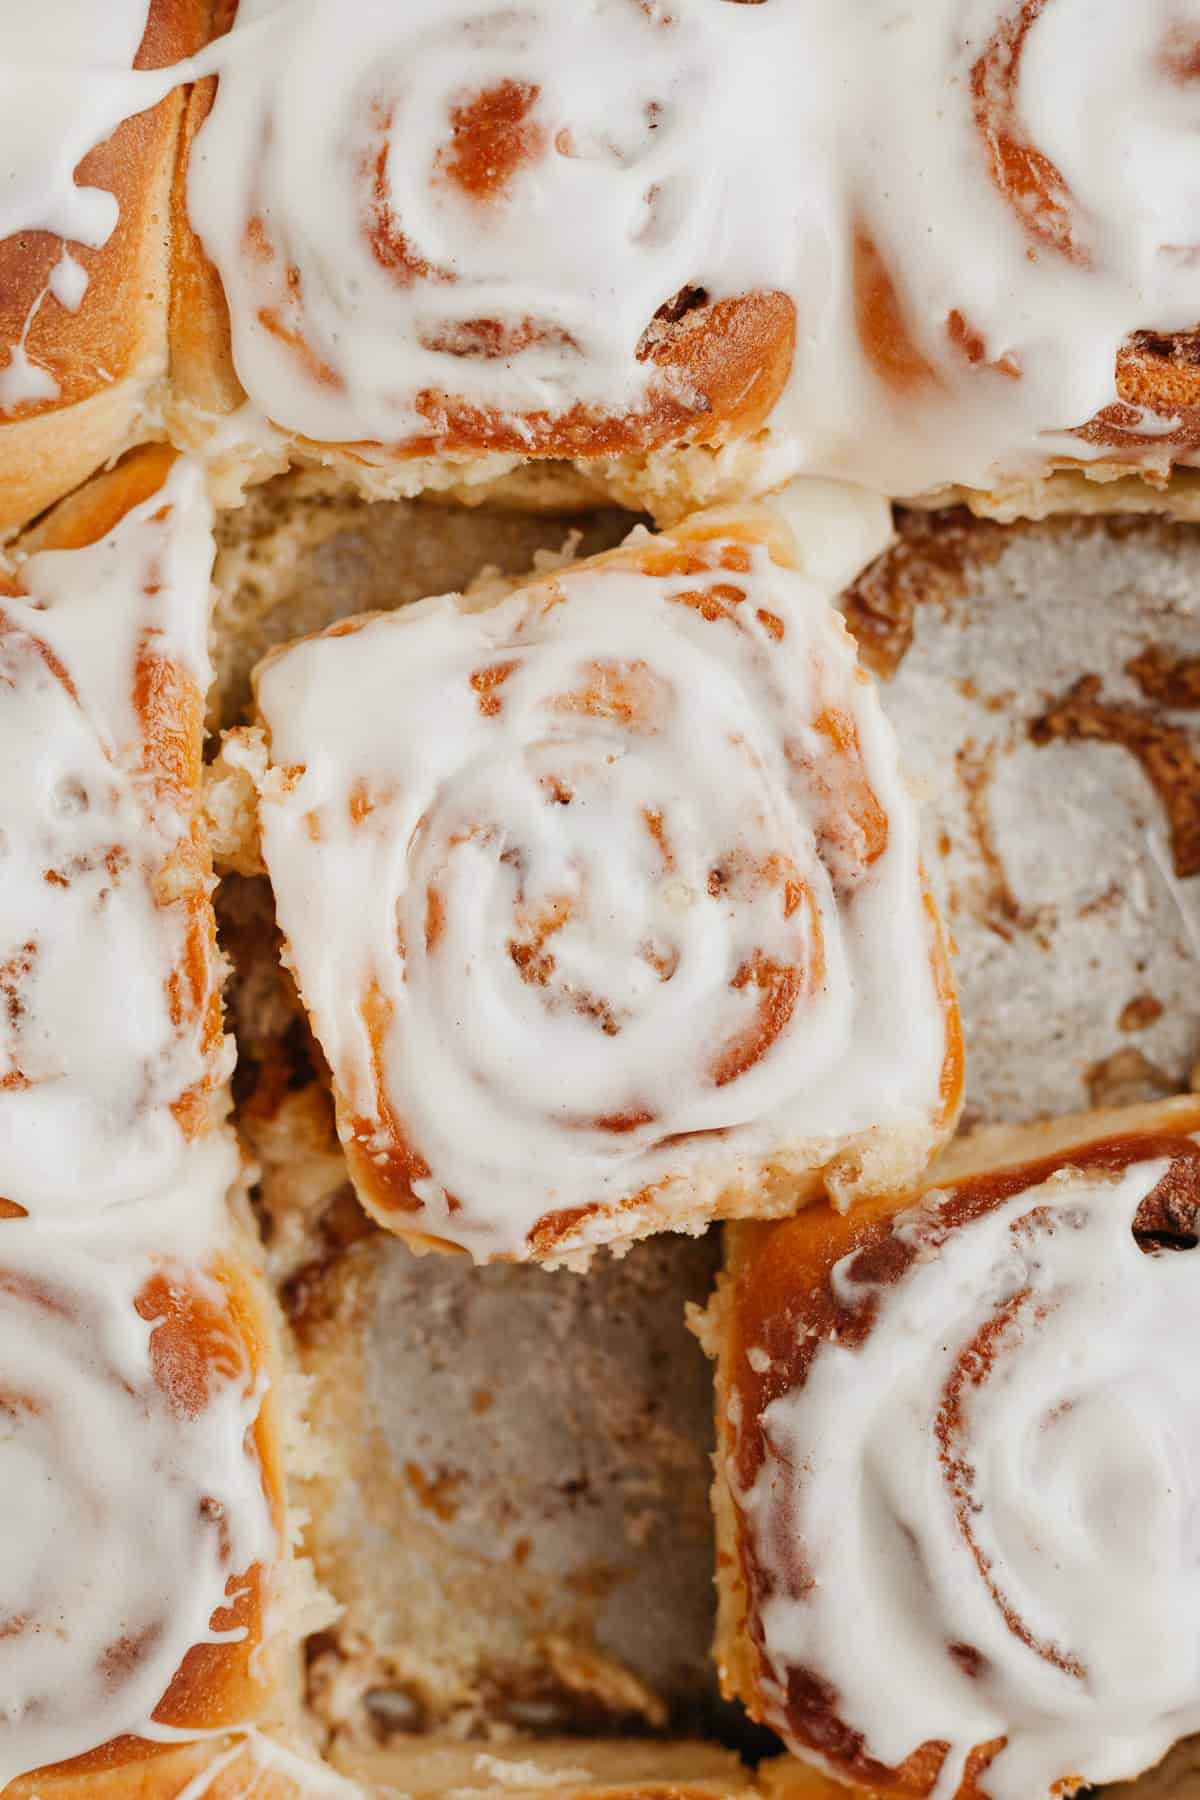 Cinnamon rolls in a pan, covered in a cream cheese glaze.